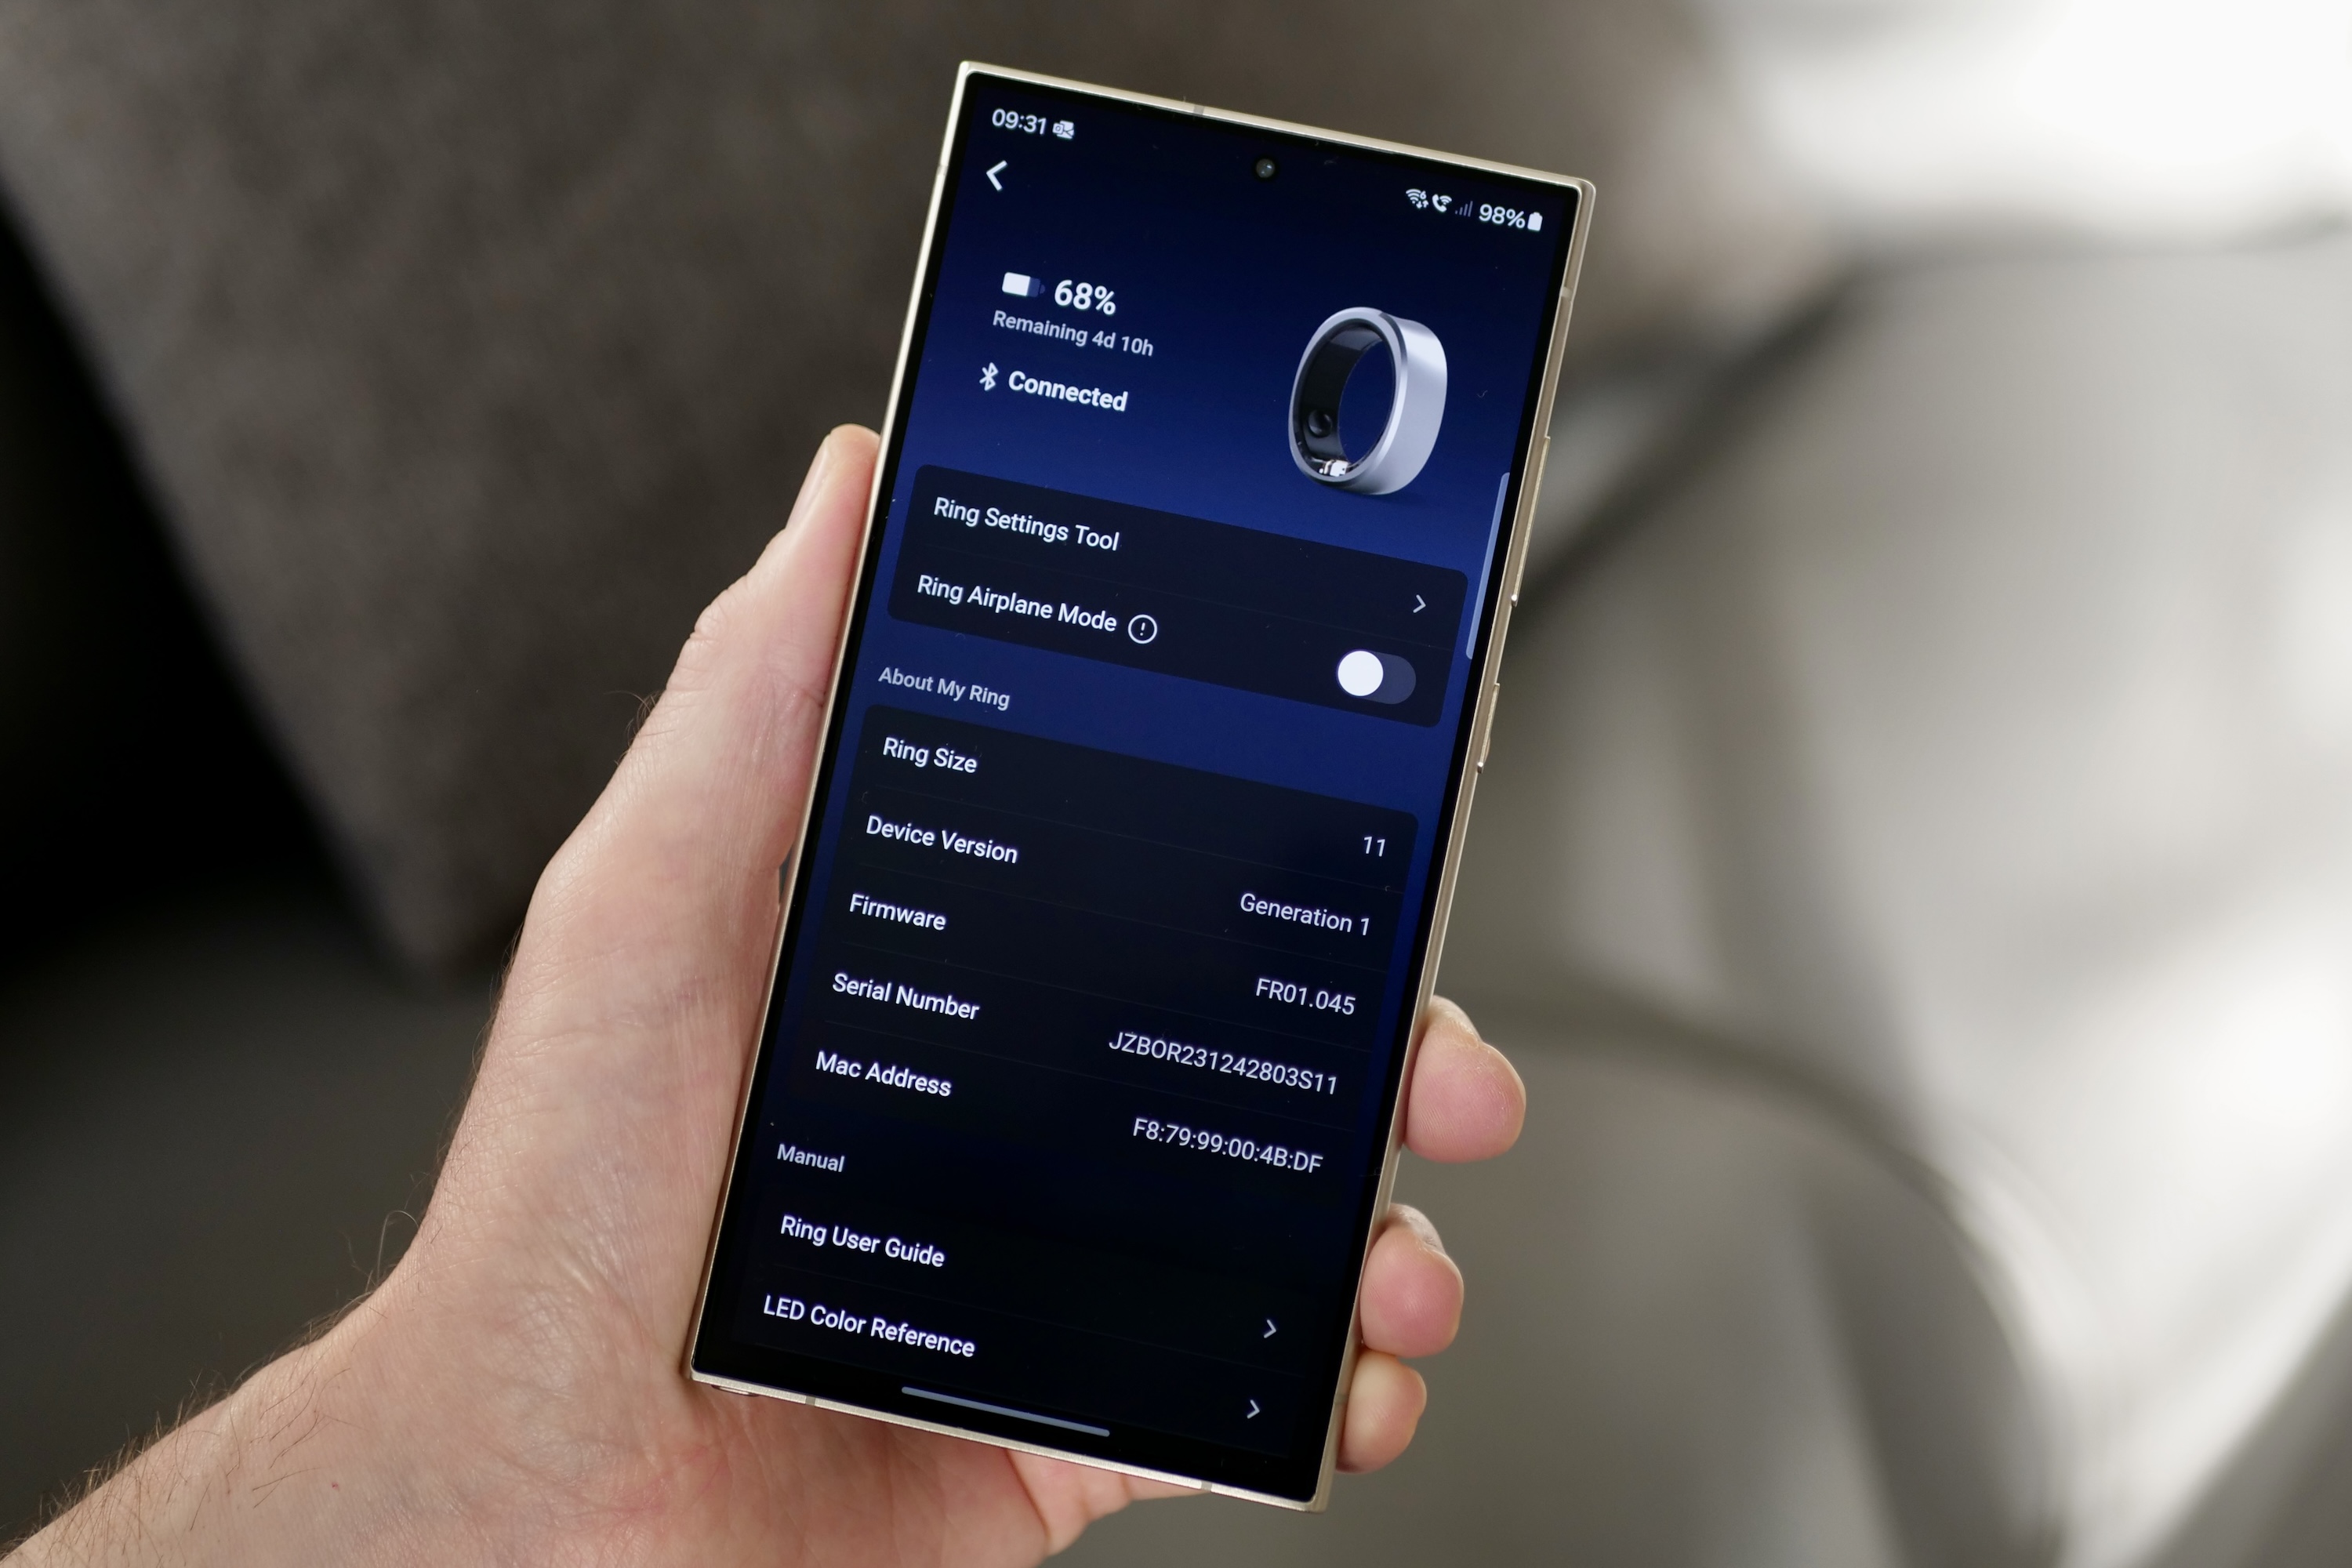 The RingConn Smart Ring's app shown on a phone screen.